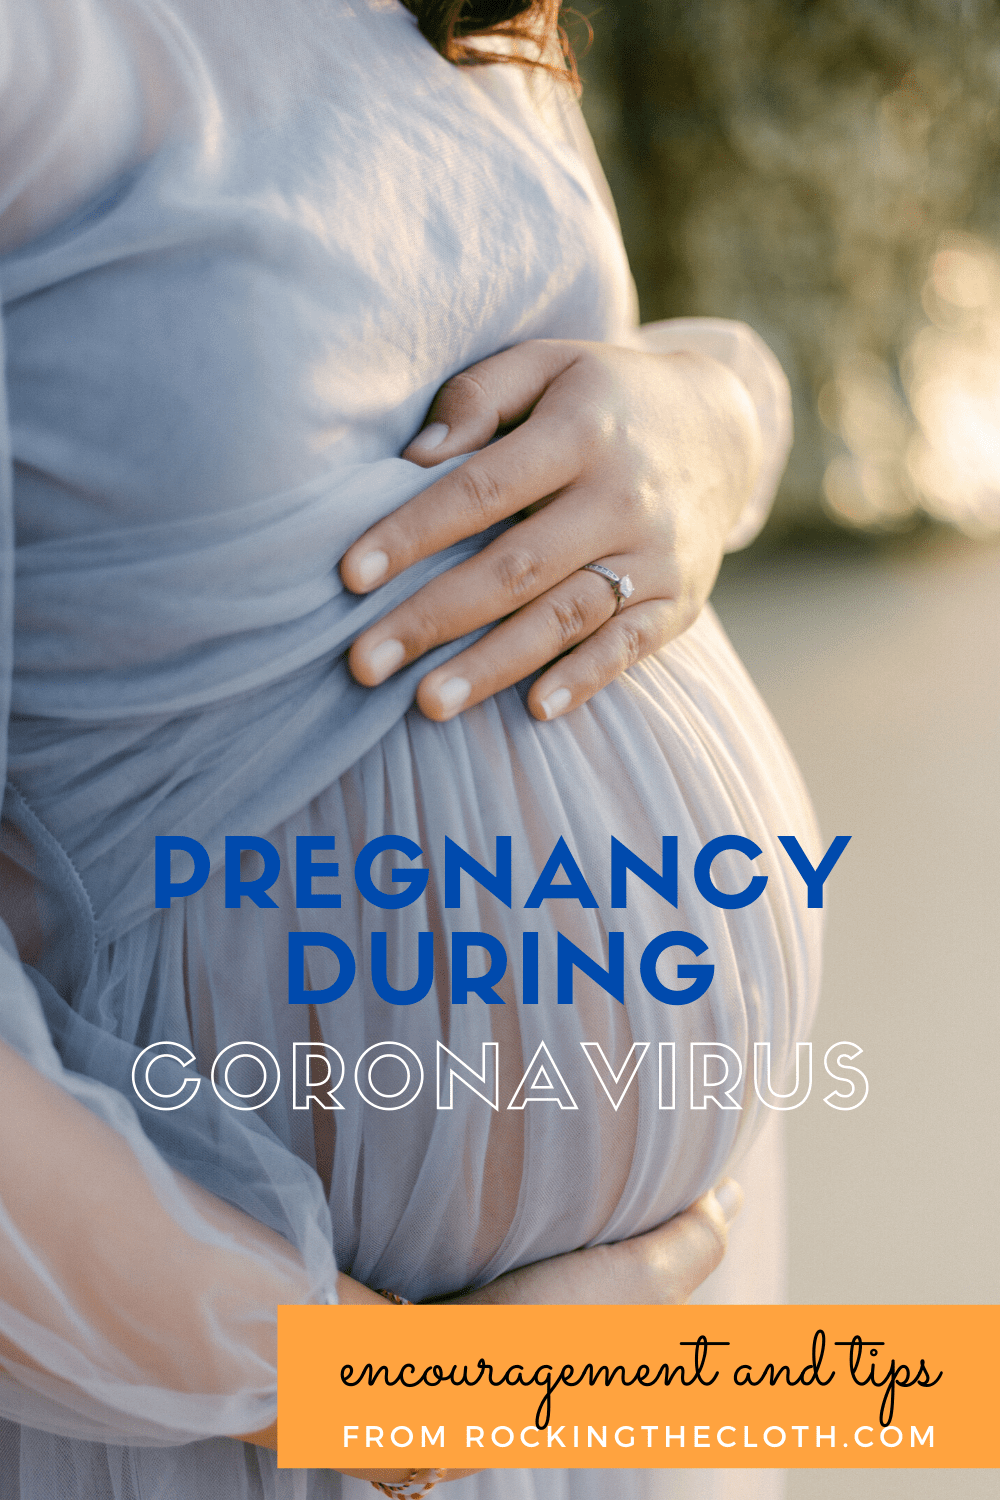 Pregnancy During Coronavirus – Making The Most Of It